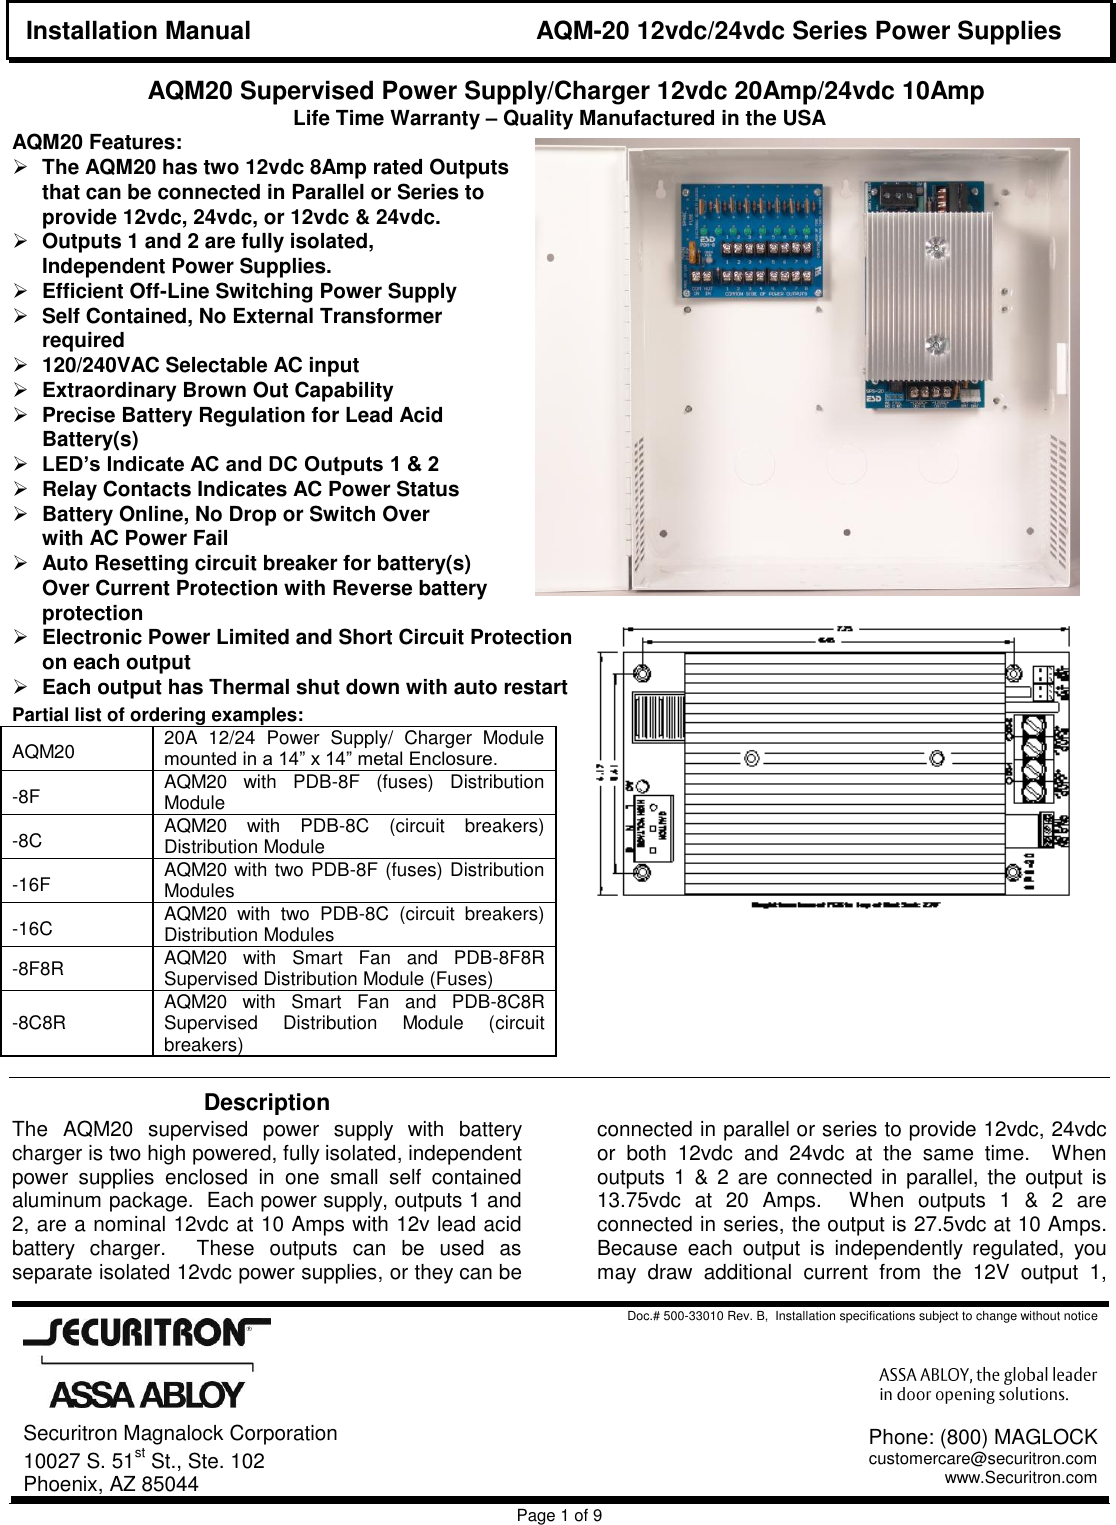 Page 1 of 8 - Securitron SPS-5 And SPS-10 Technical Sales Bulletin AQM-20 Installation Manual I 500-33010 B